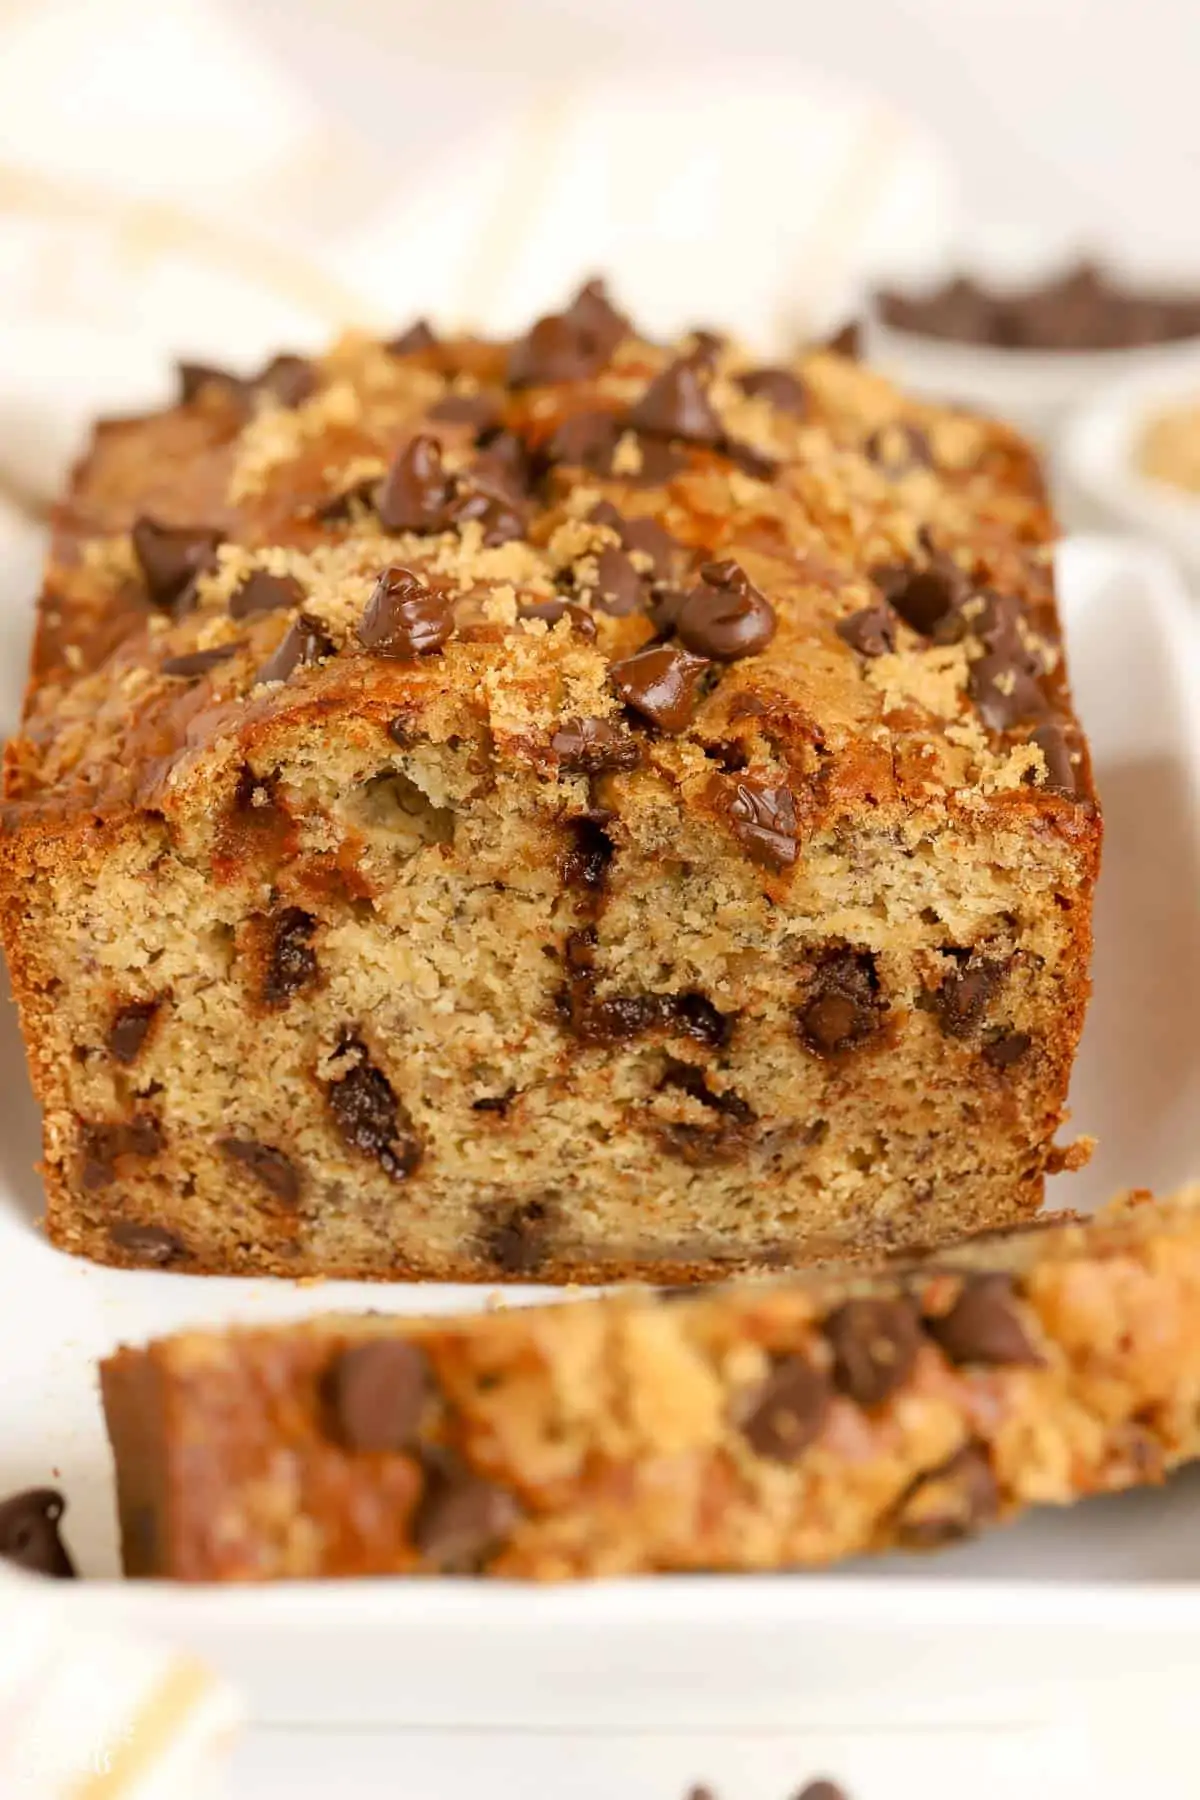 Closeup of a loaf of chocolate chip banana bread on a white plate.